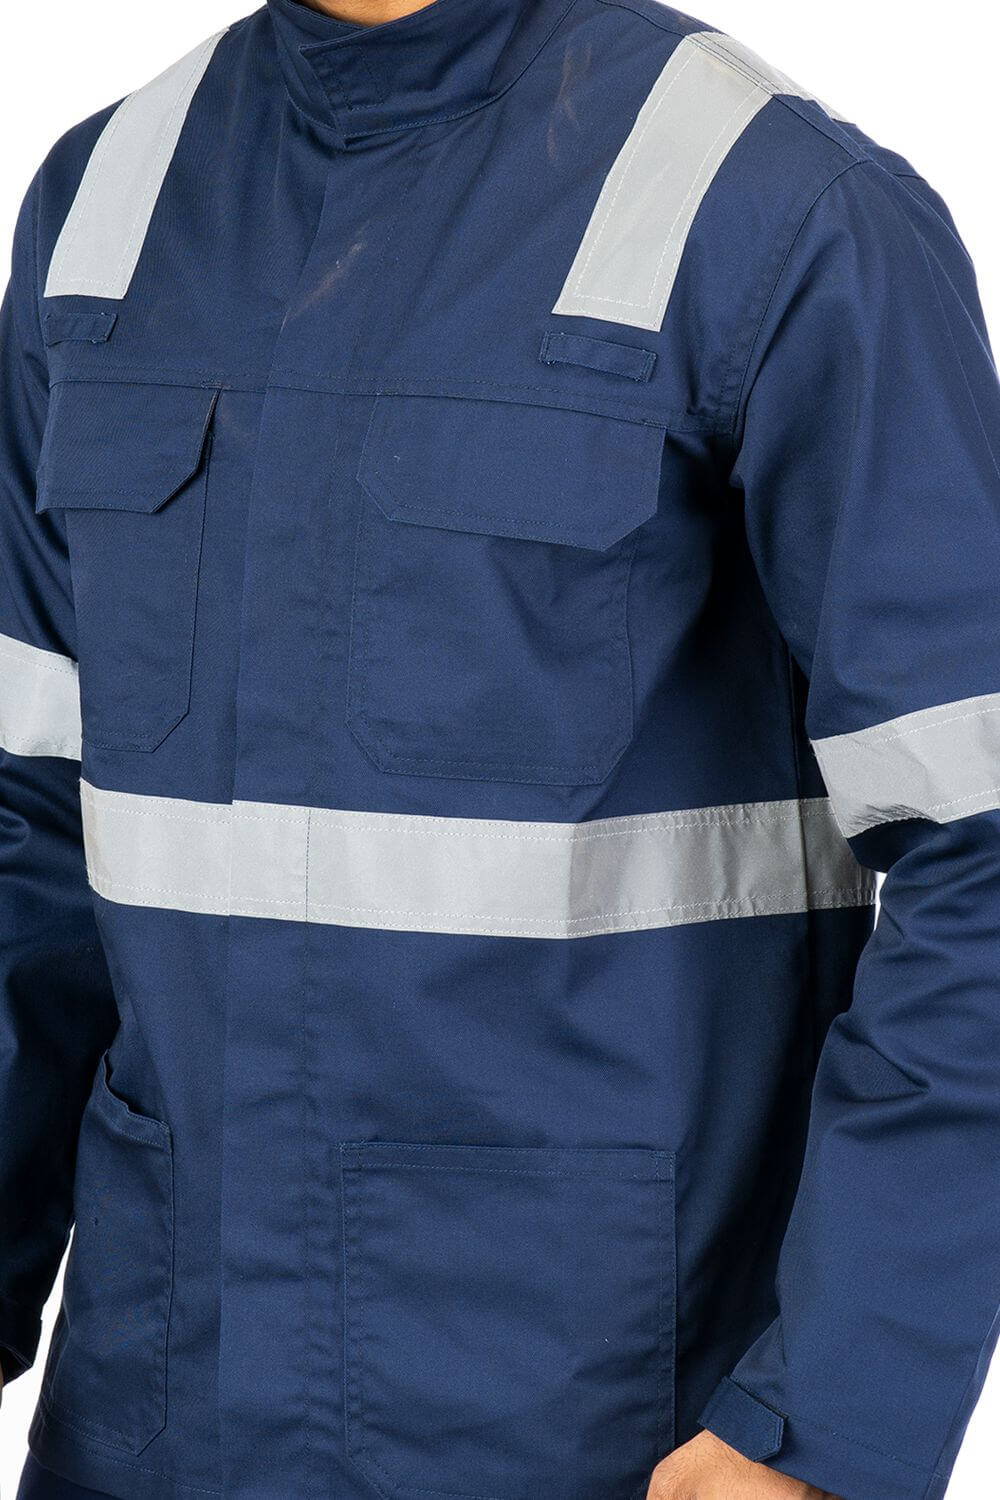 Industrial work jacket designed to provide optimum comfort and mobility during the strenuous hours at work.